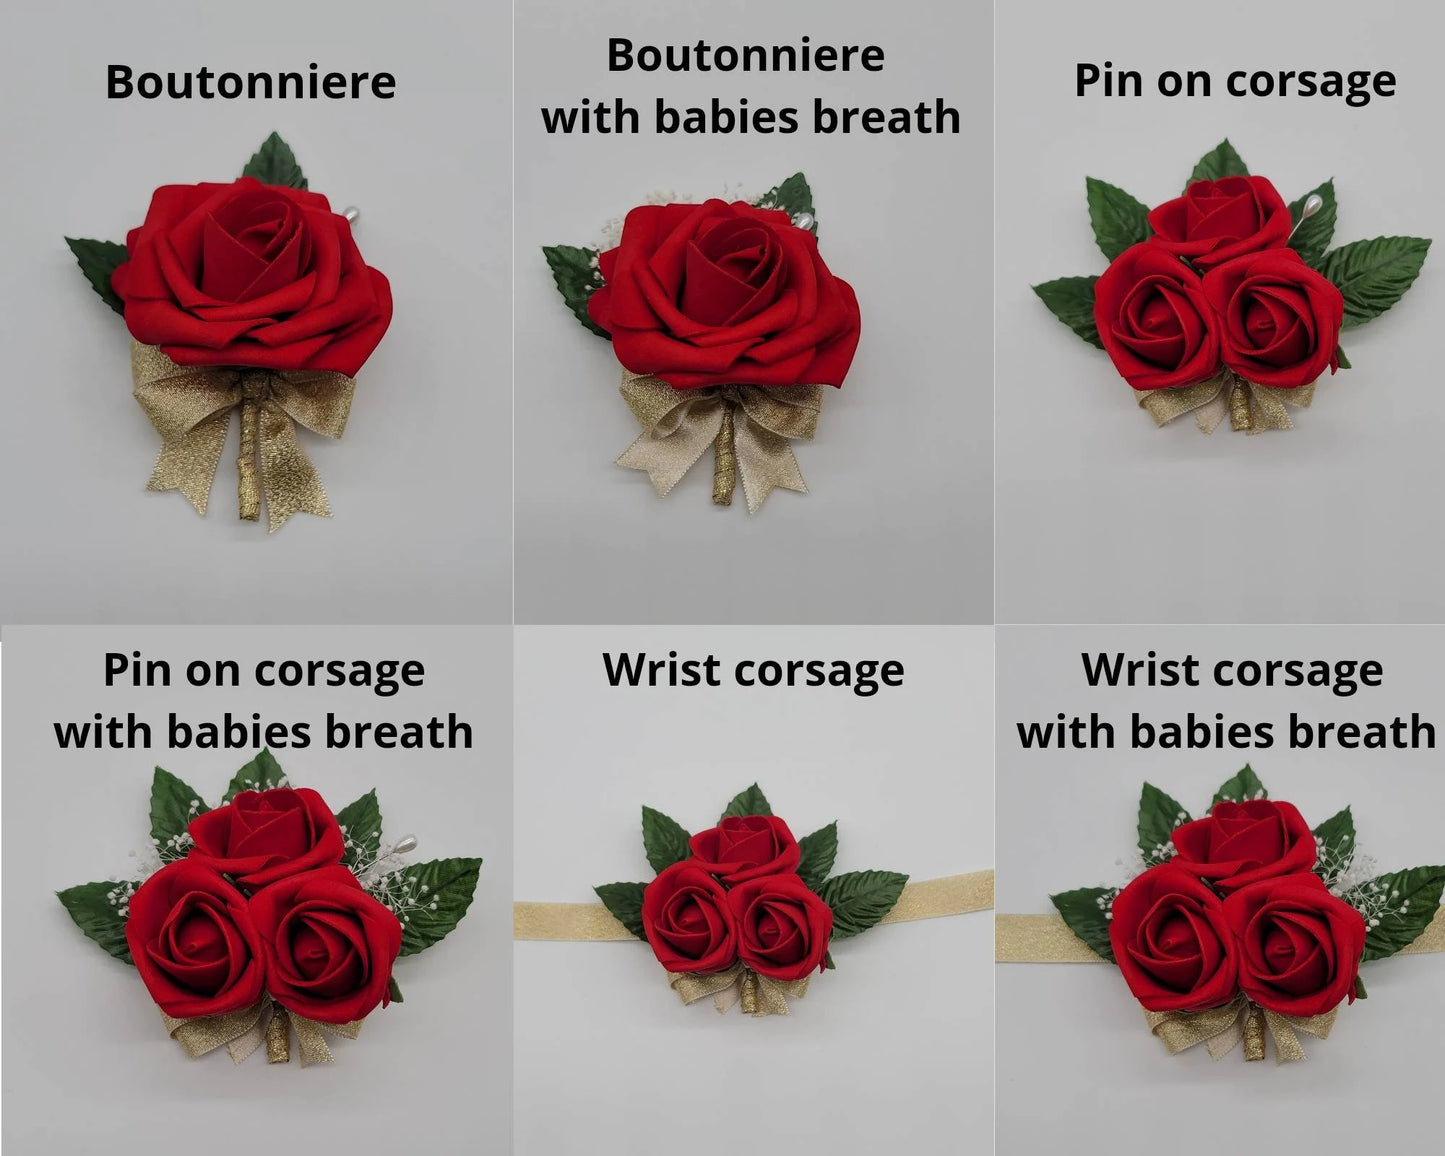 Dusty Rose, White, and Silver Boutonnieres and Corsages